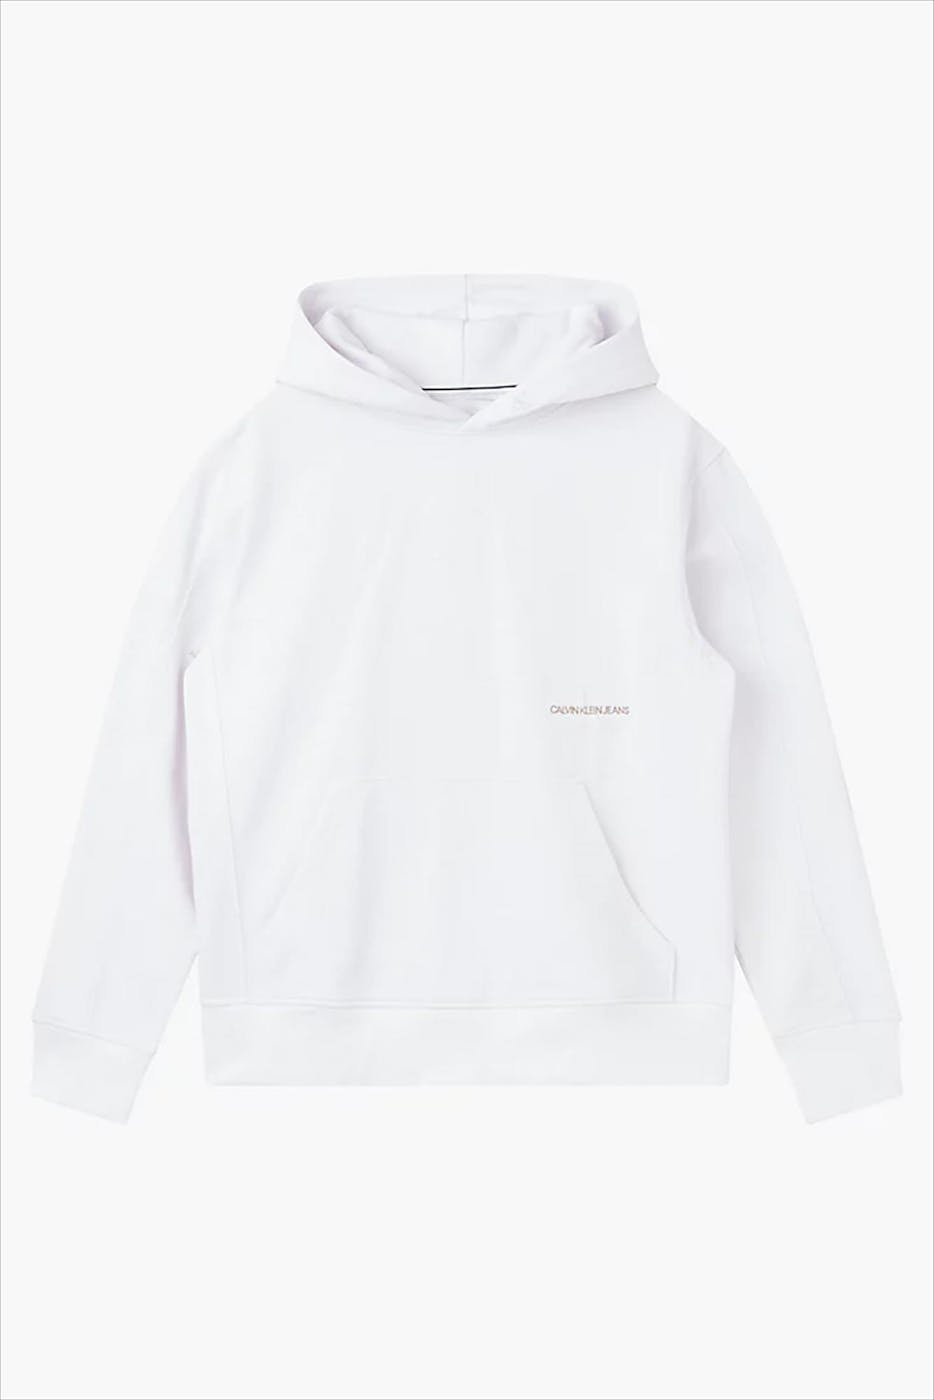 Calvin Klein Jeans - Witte placed iconic logo hoodie